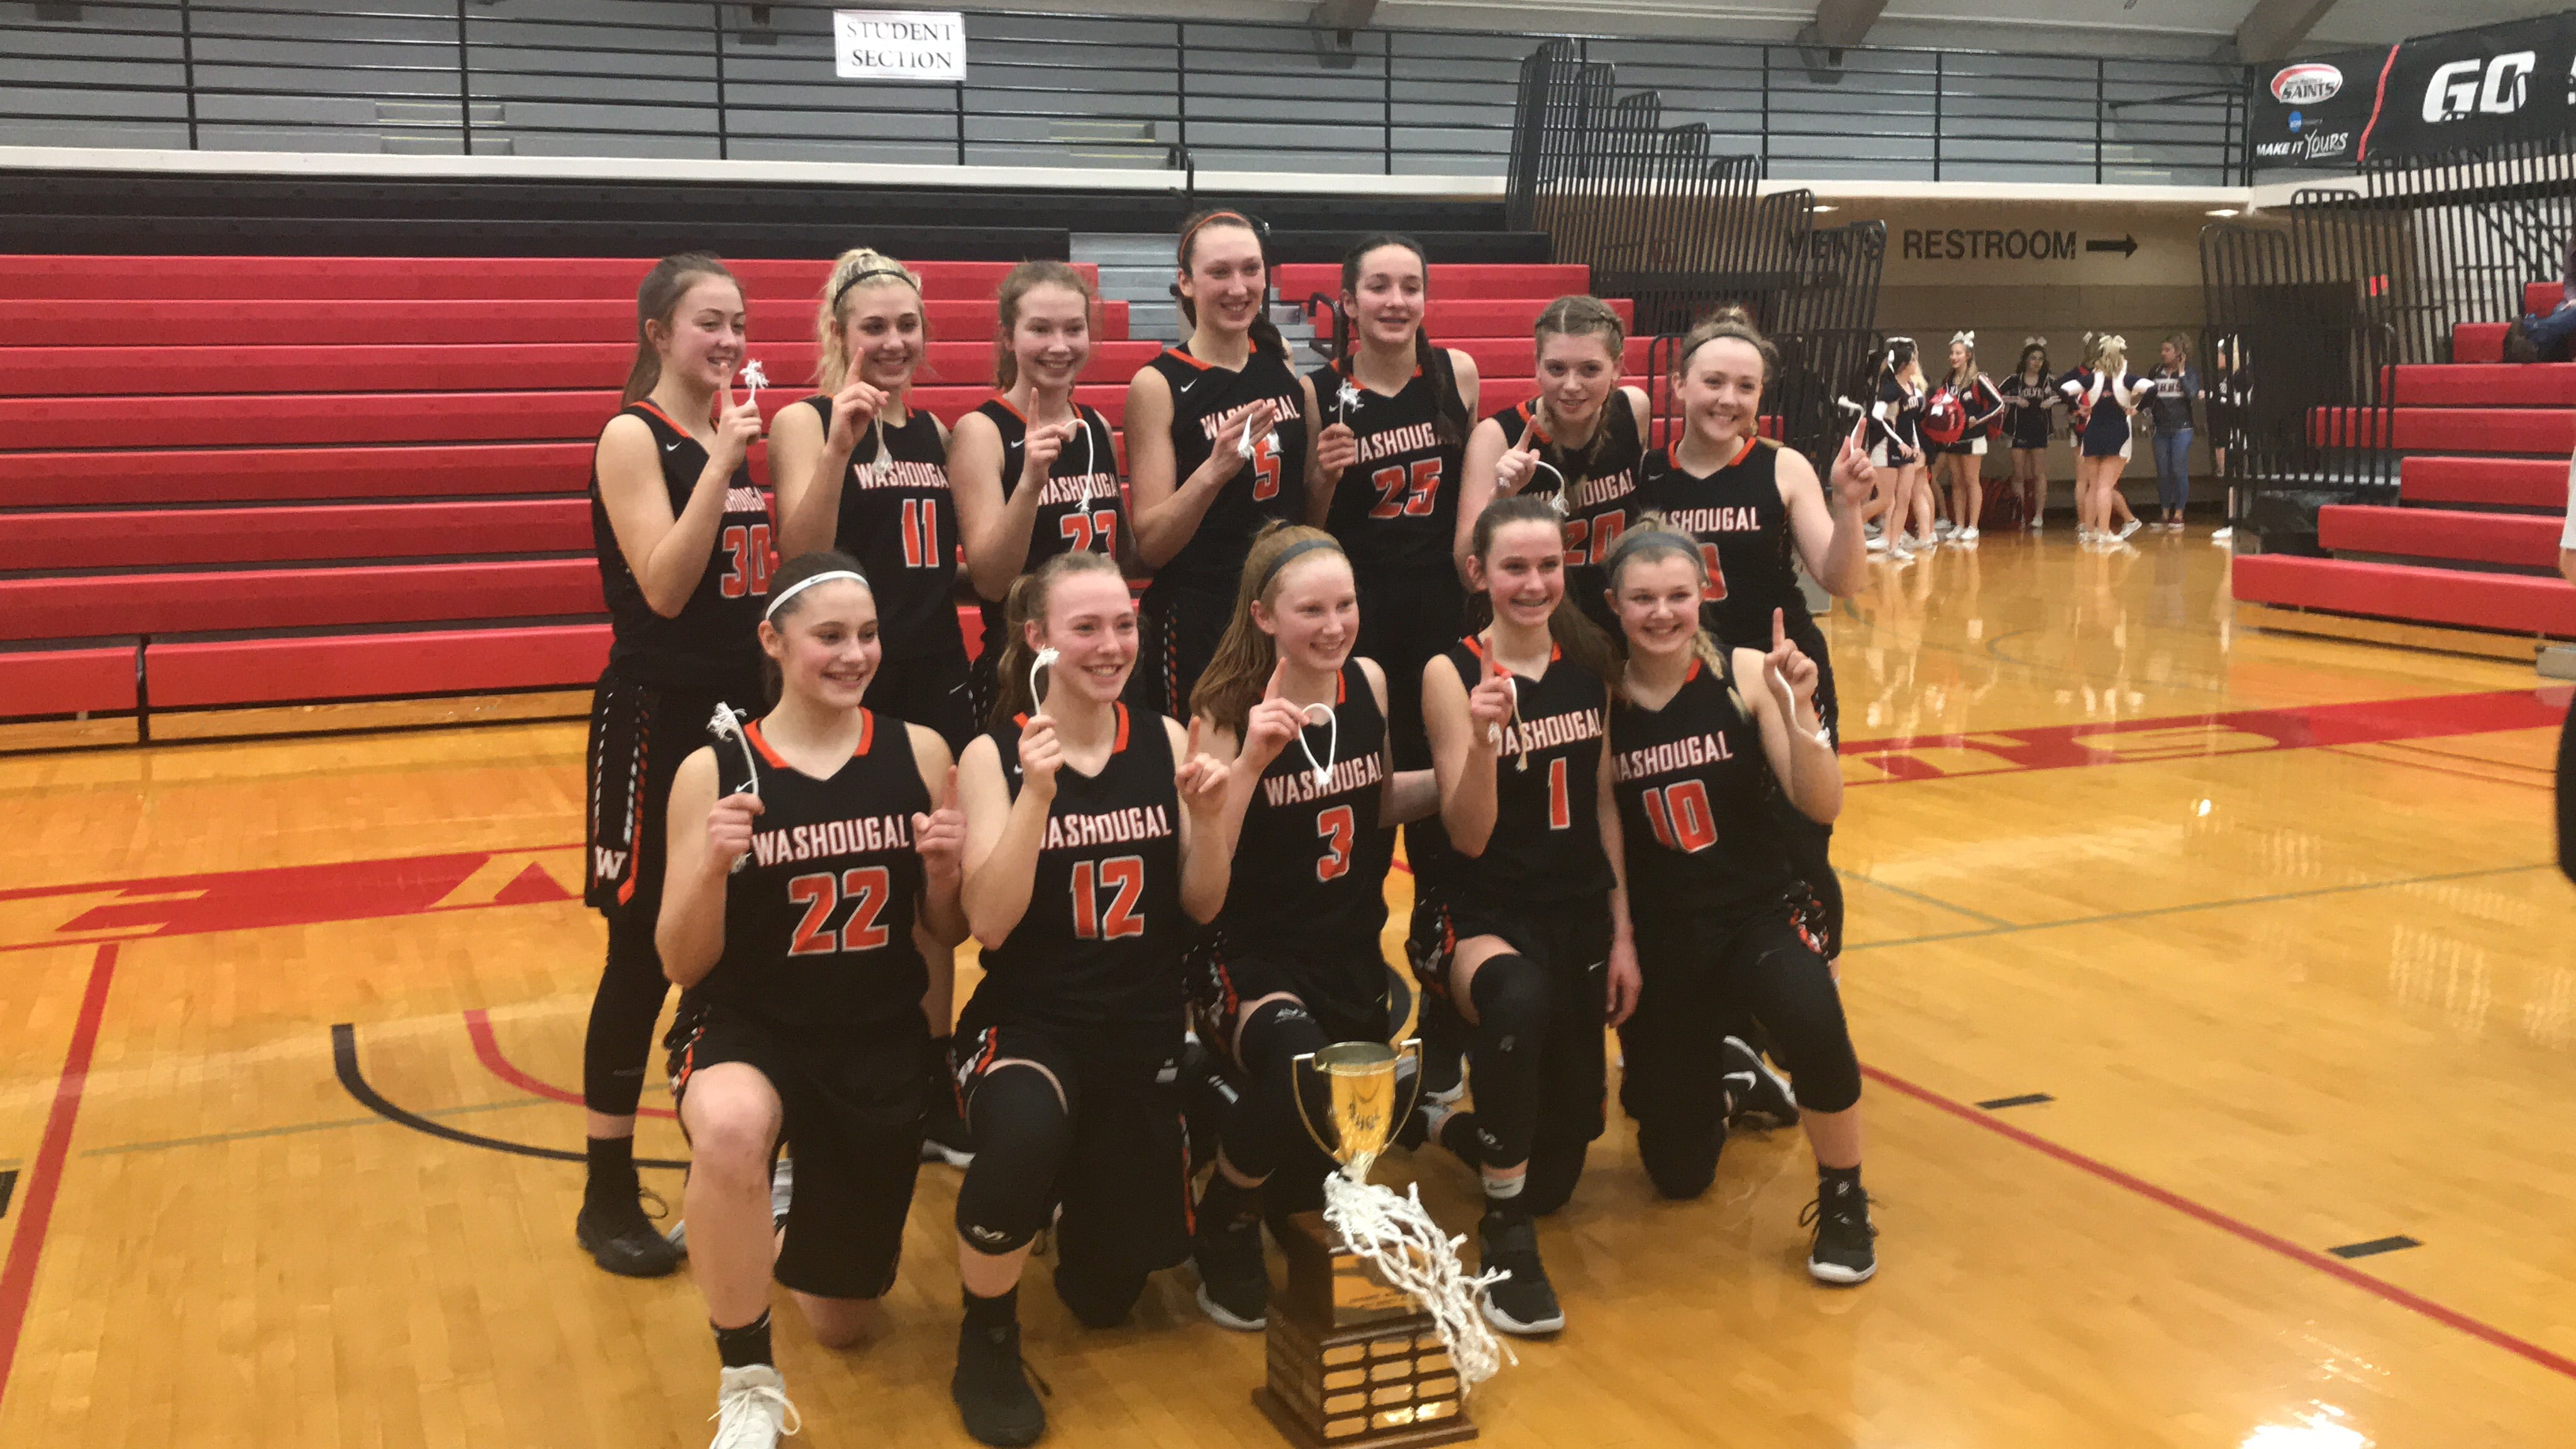 The Washougal girls basketball team pose with the district championship trophy after beating W.F.